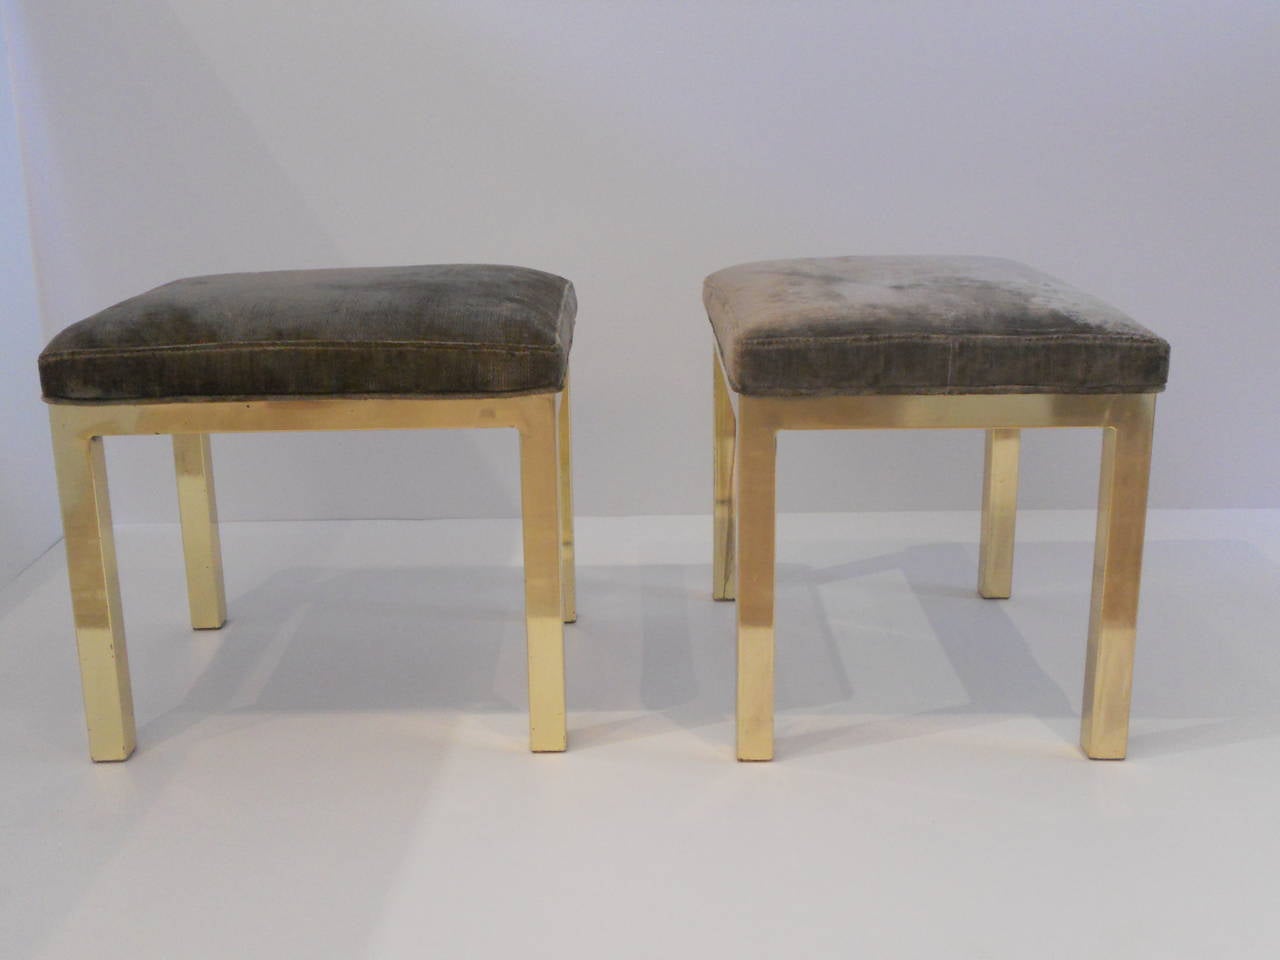 Late 20th Century Pair of Vintage Brass Ottomans or Stools, c.1970